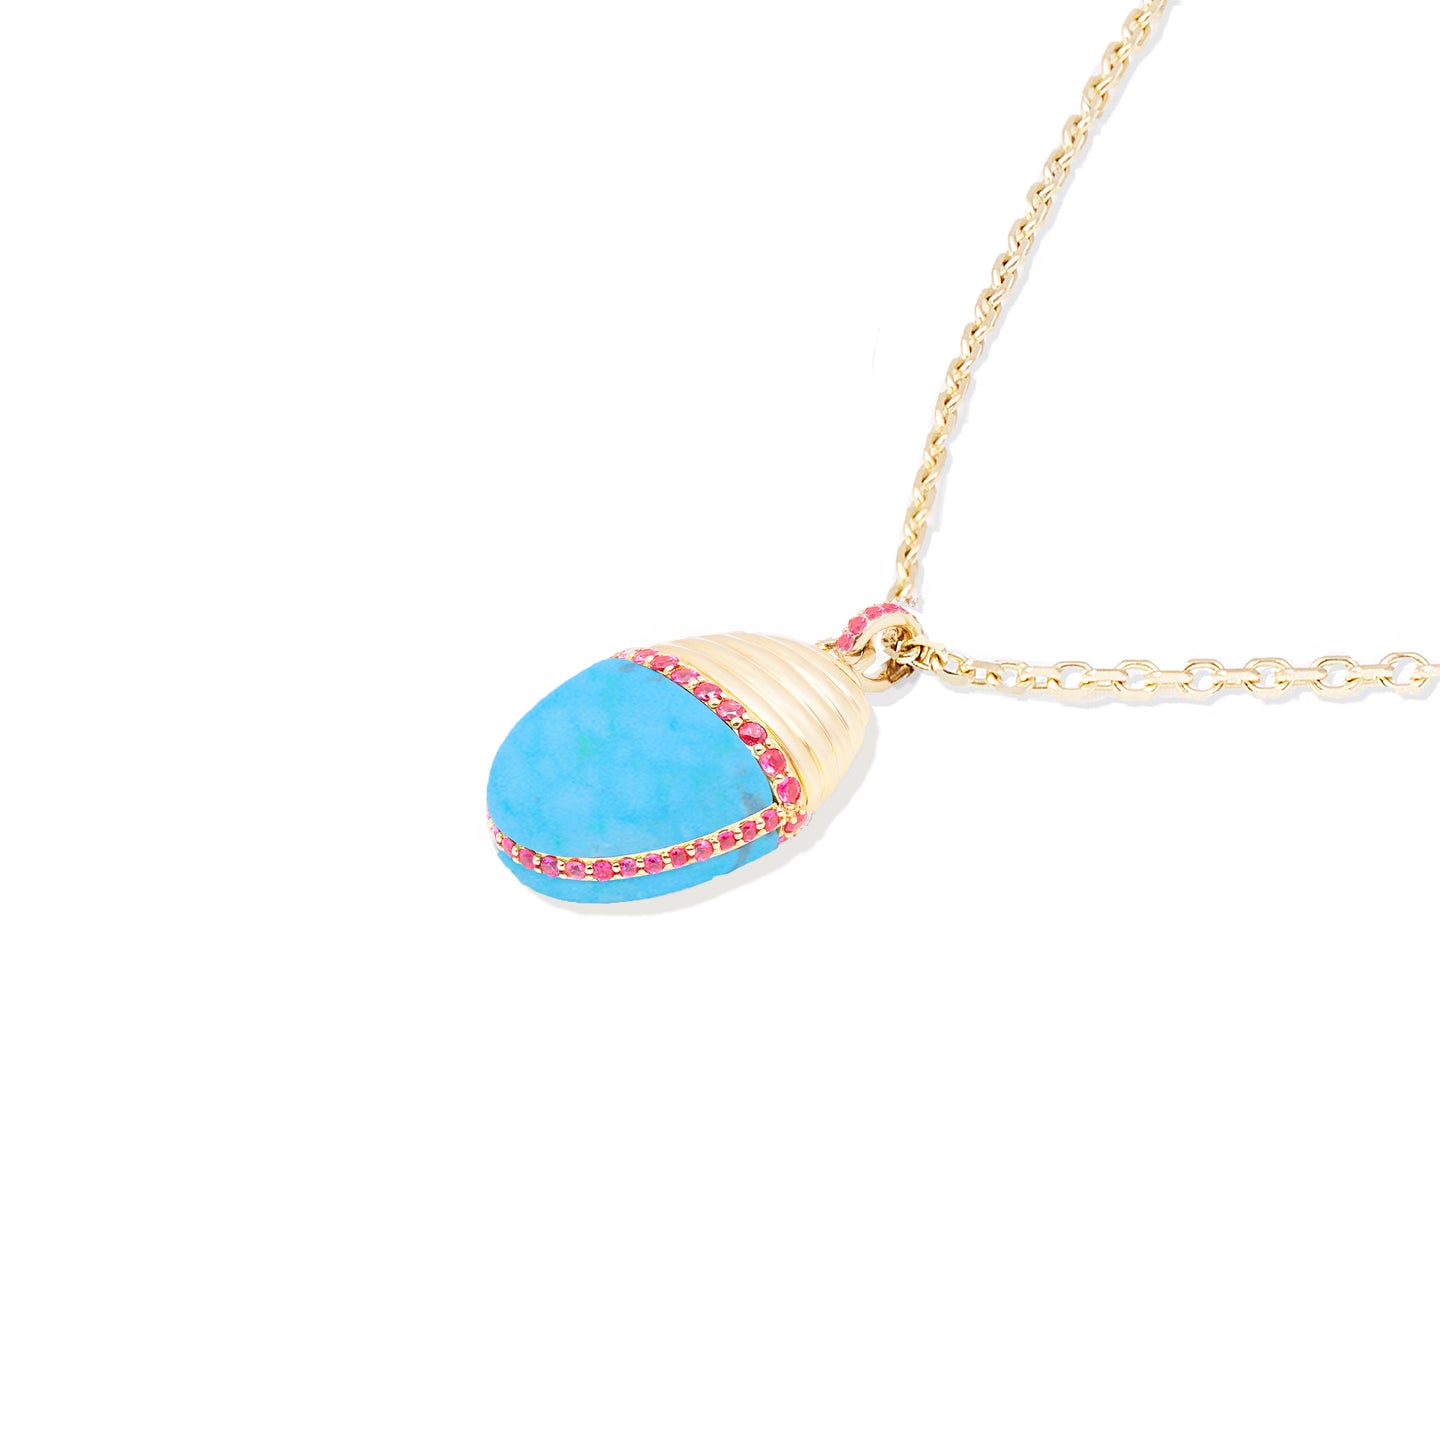 Found Large Cap Pendant Necklace - Turquoise & Pink Sapphire